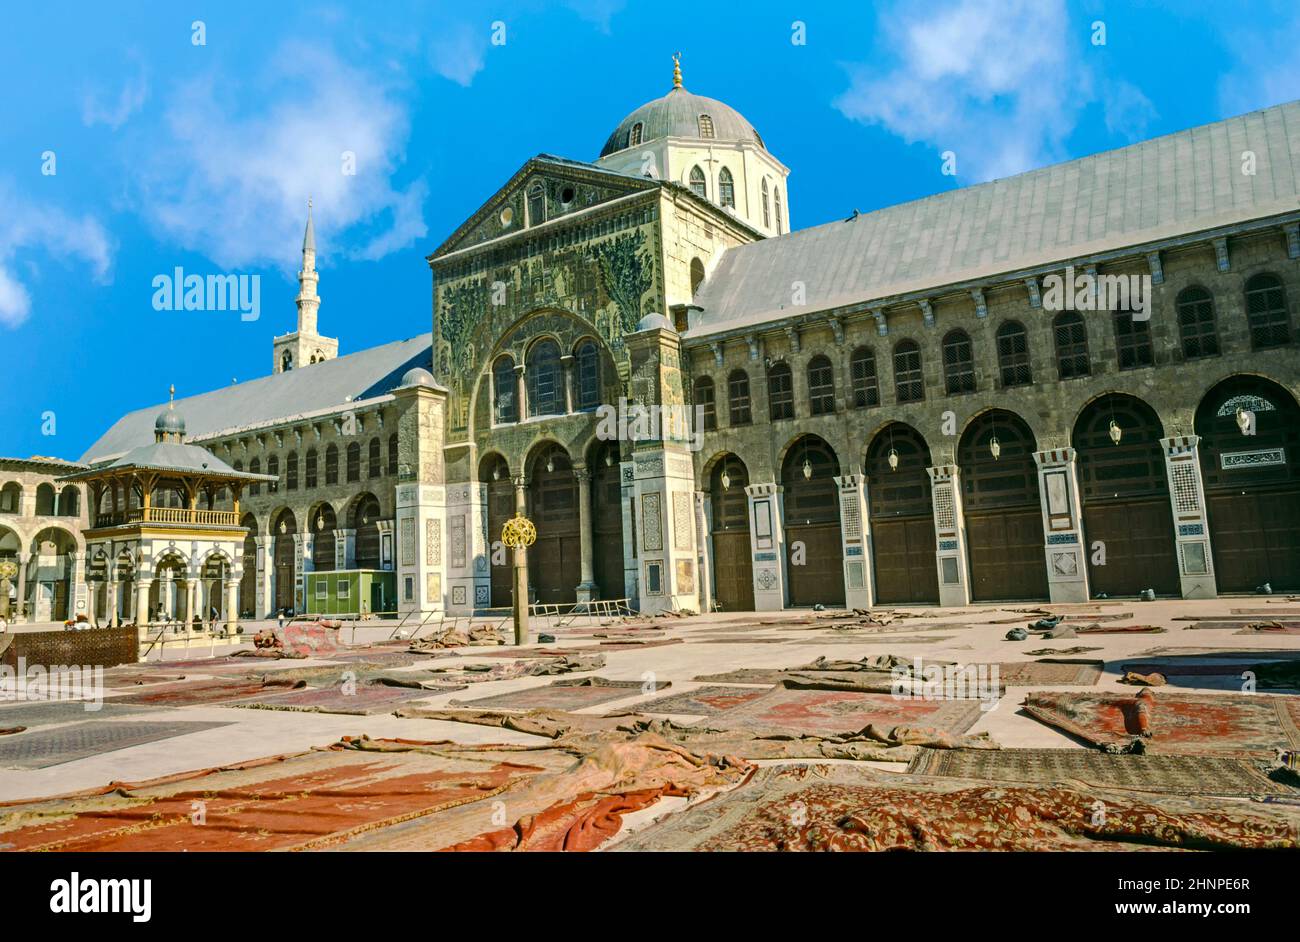 The Omayyad Mosque with clear blue sky Stock Photo